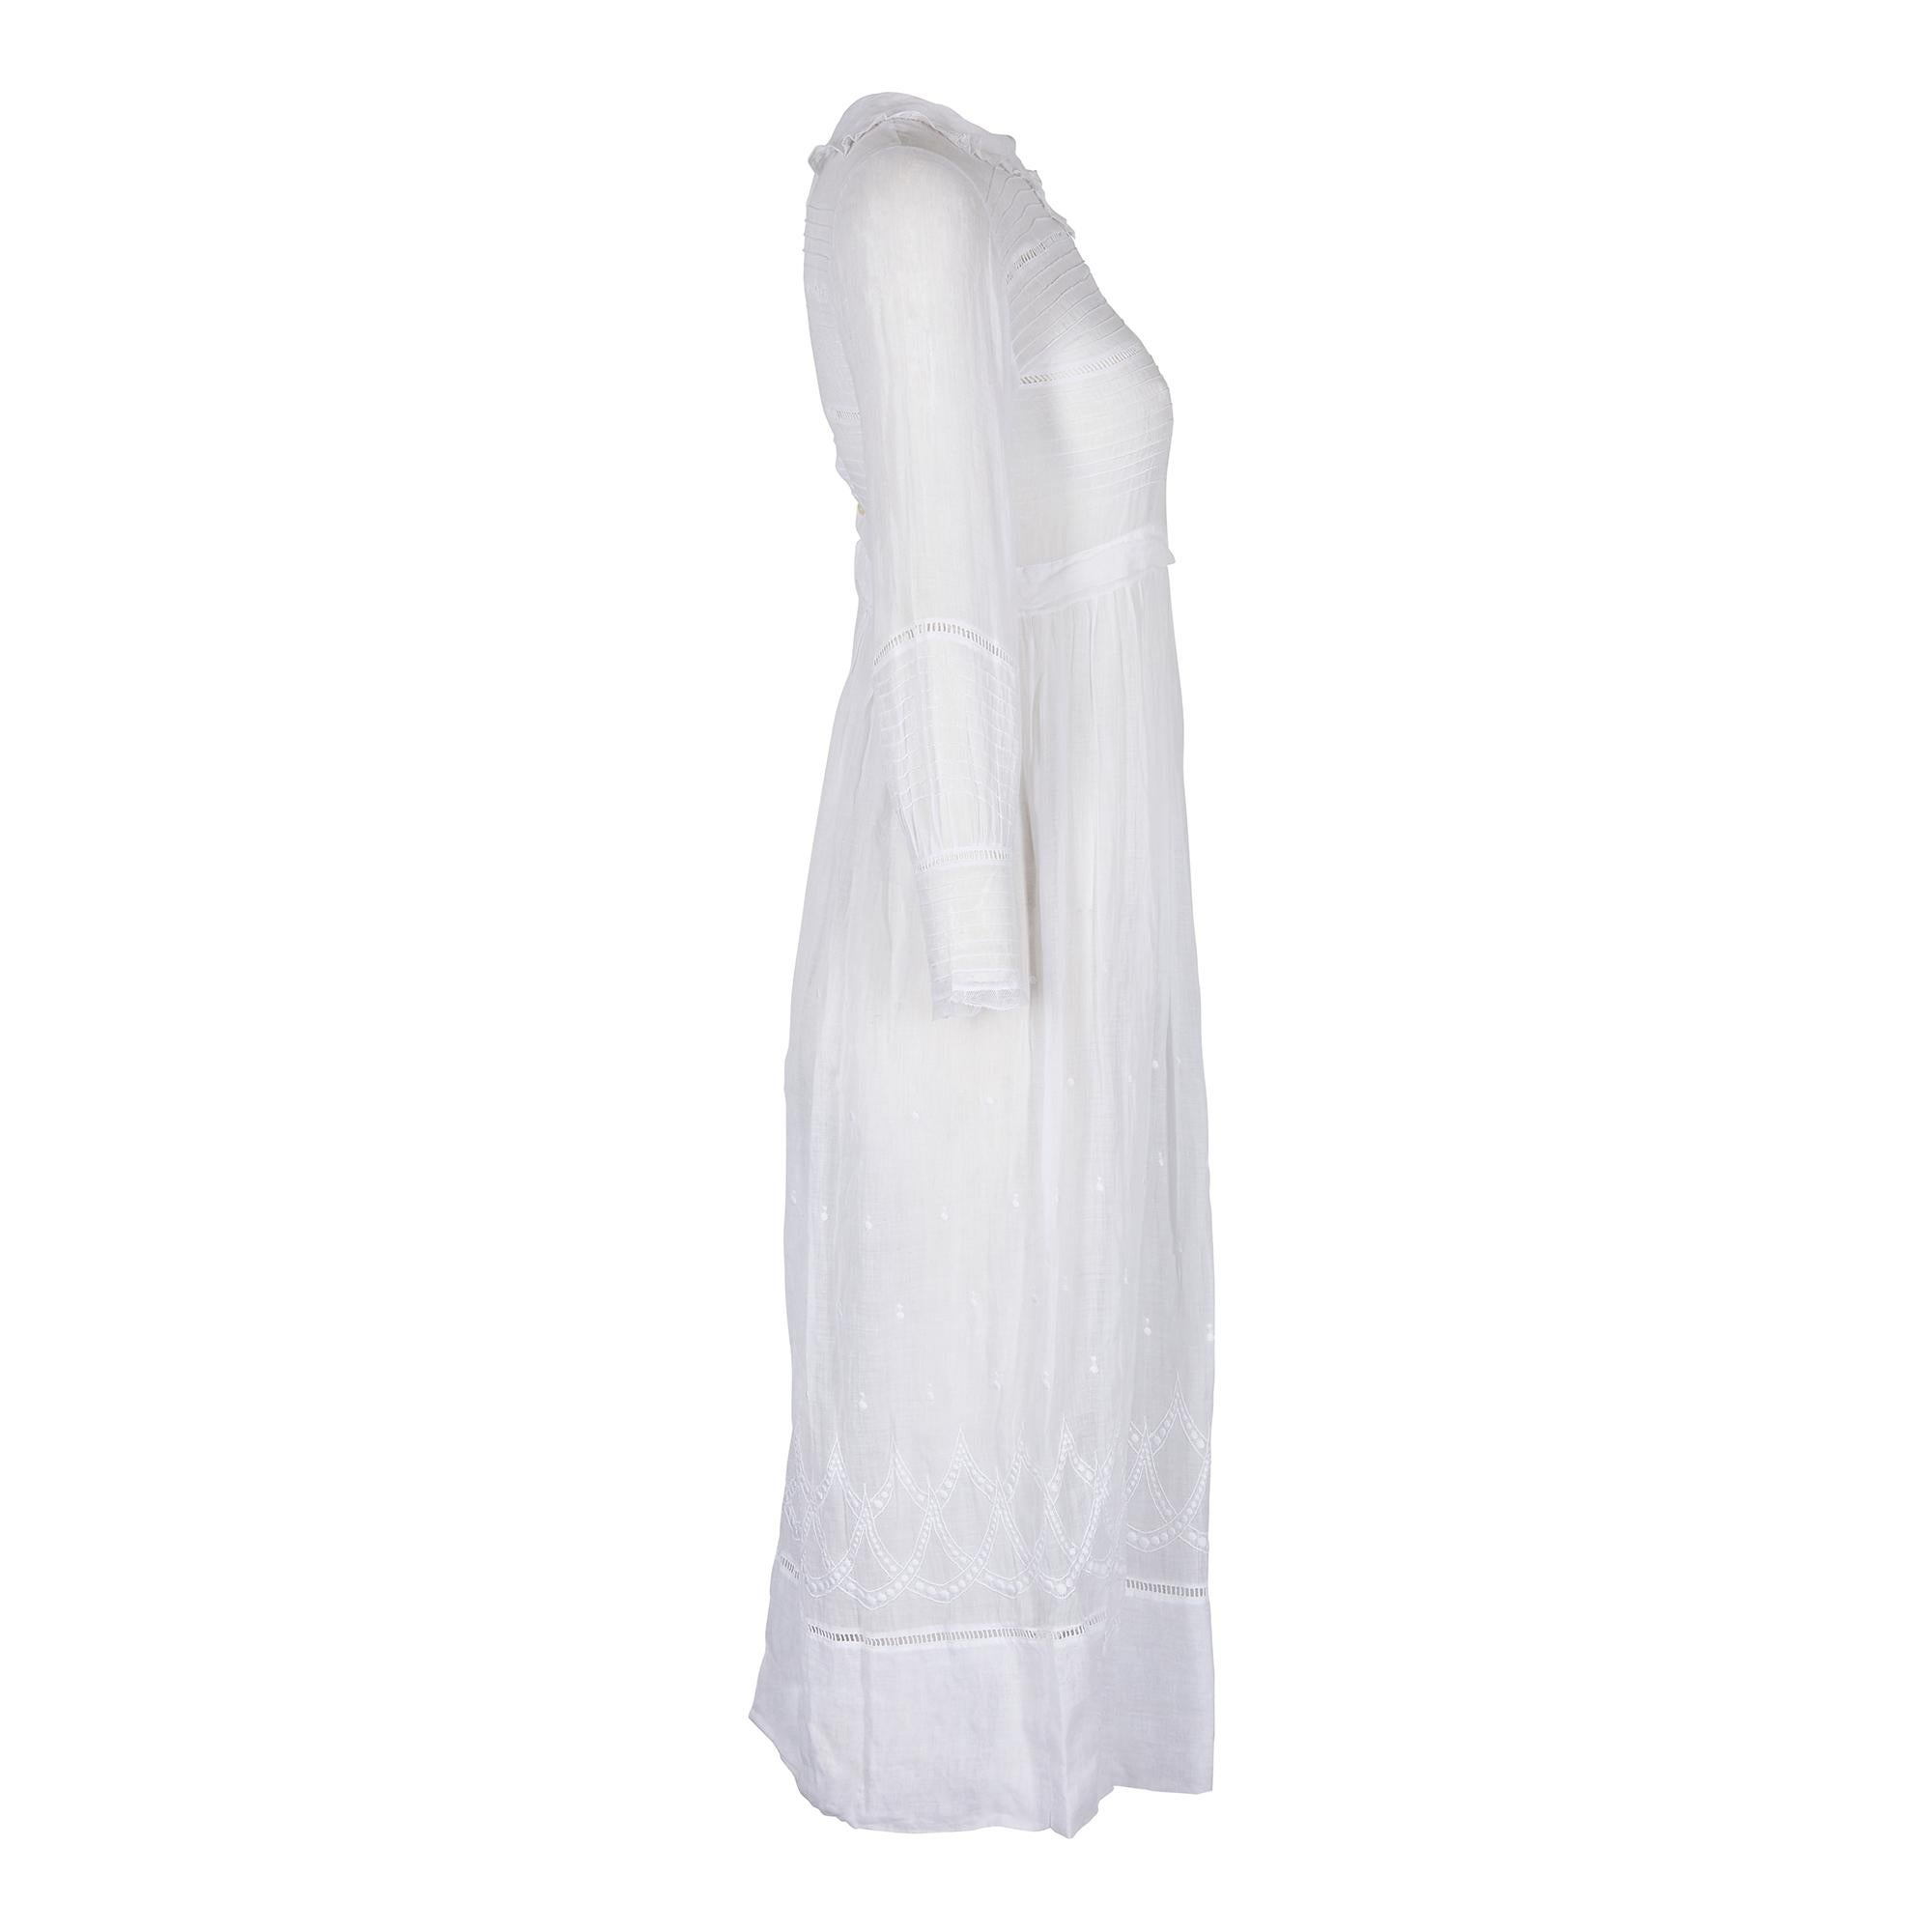 This is a very fine handmade Edwardian to early 1910s cotton white cotton mousseline tea dress. It has wonderful design details; the bodice has a series of horizontal pin tuck pleats with exposed rectangular eyelets on the collar bone. These are